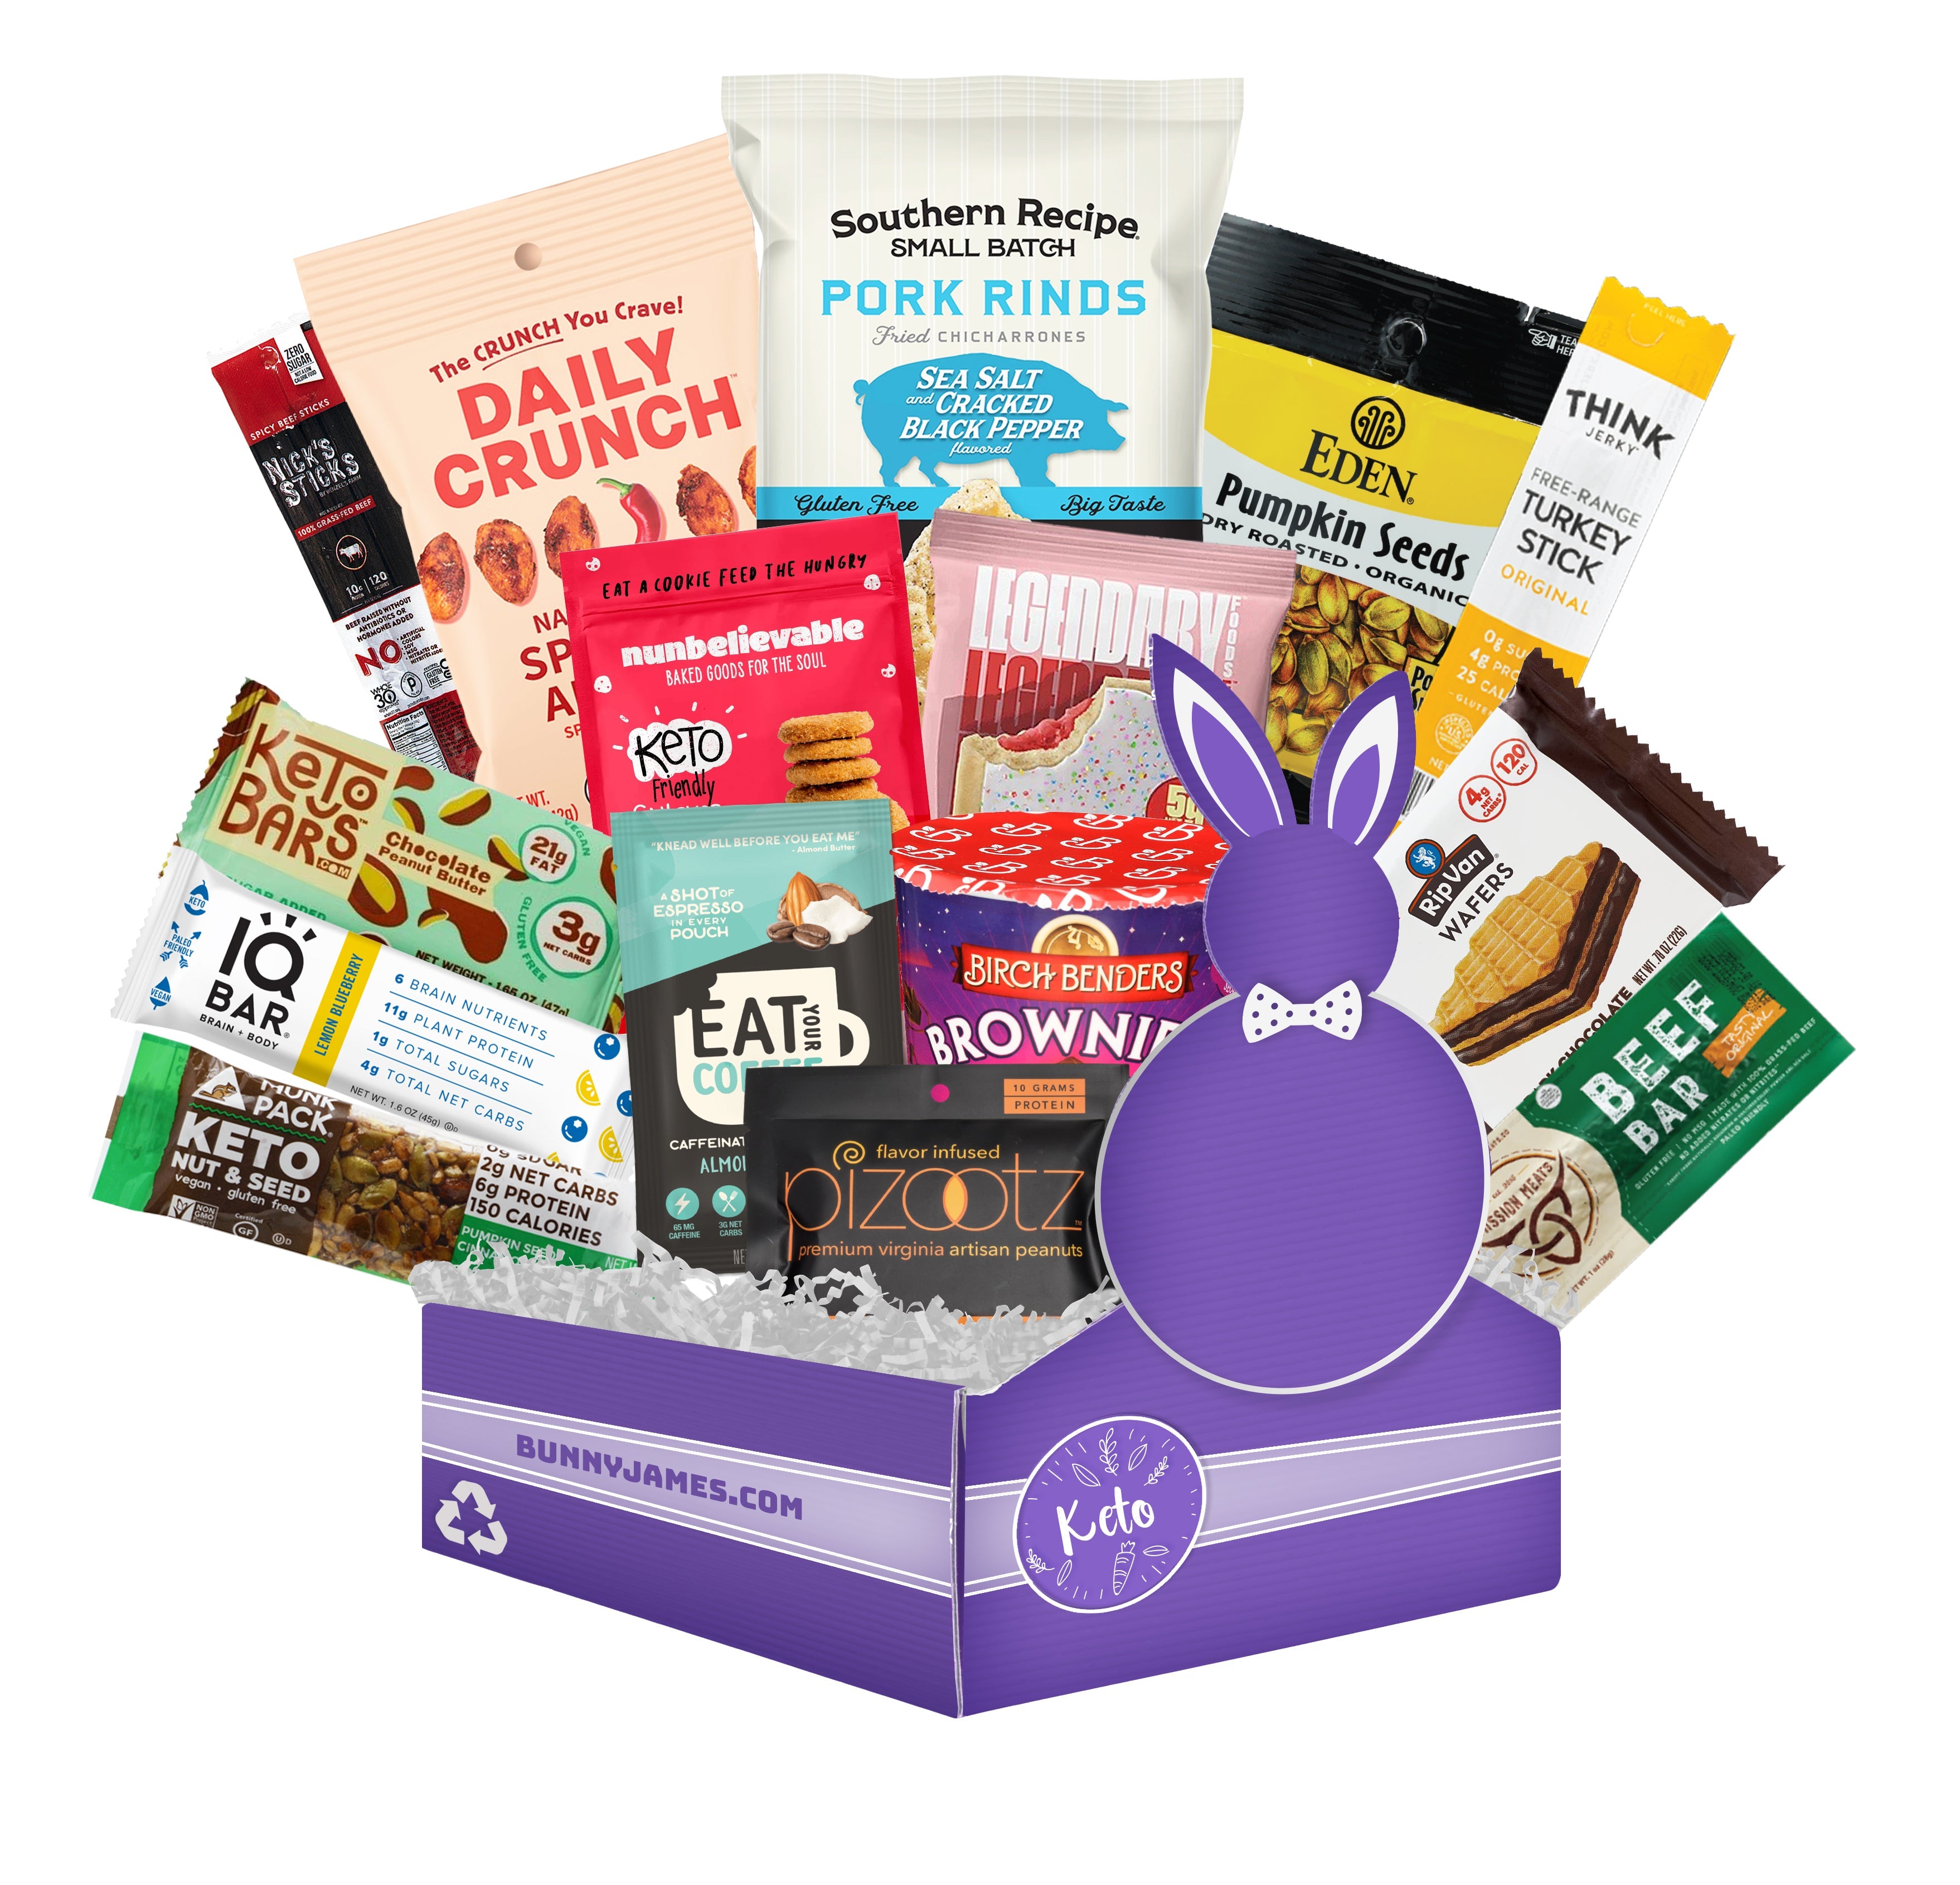 The Best and Most Useful Keto Gifts on , 2021